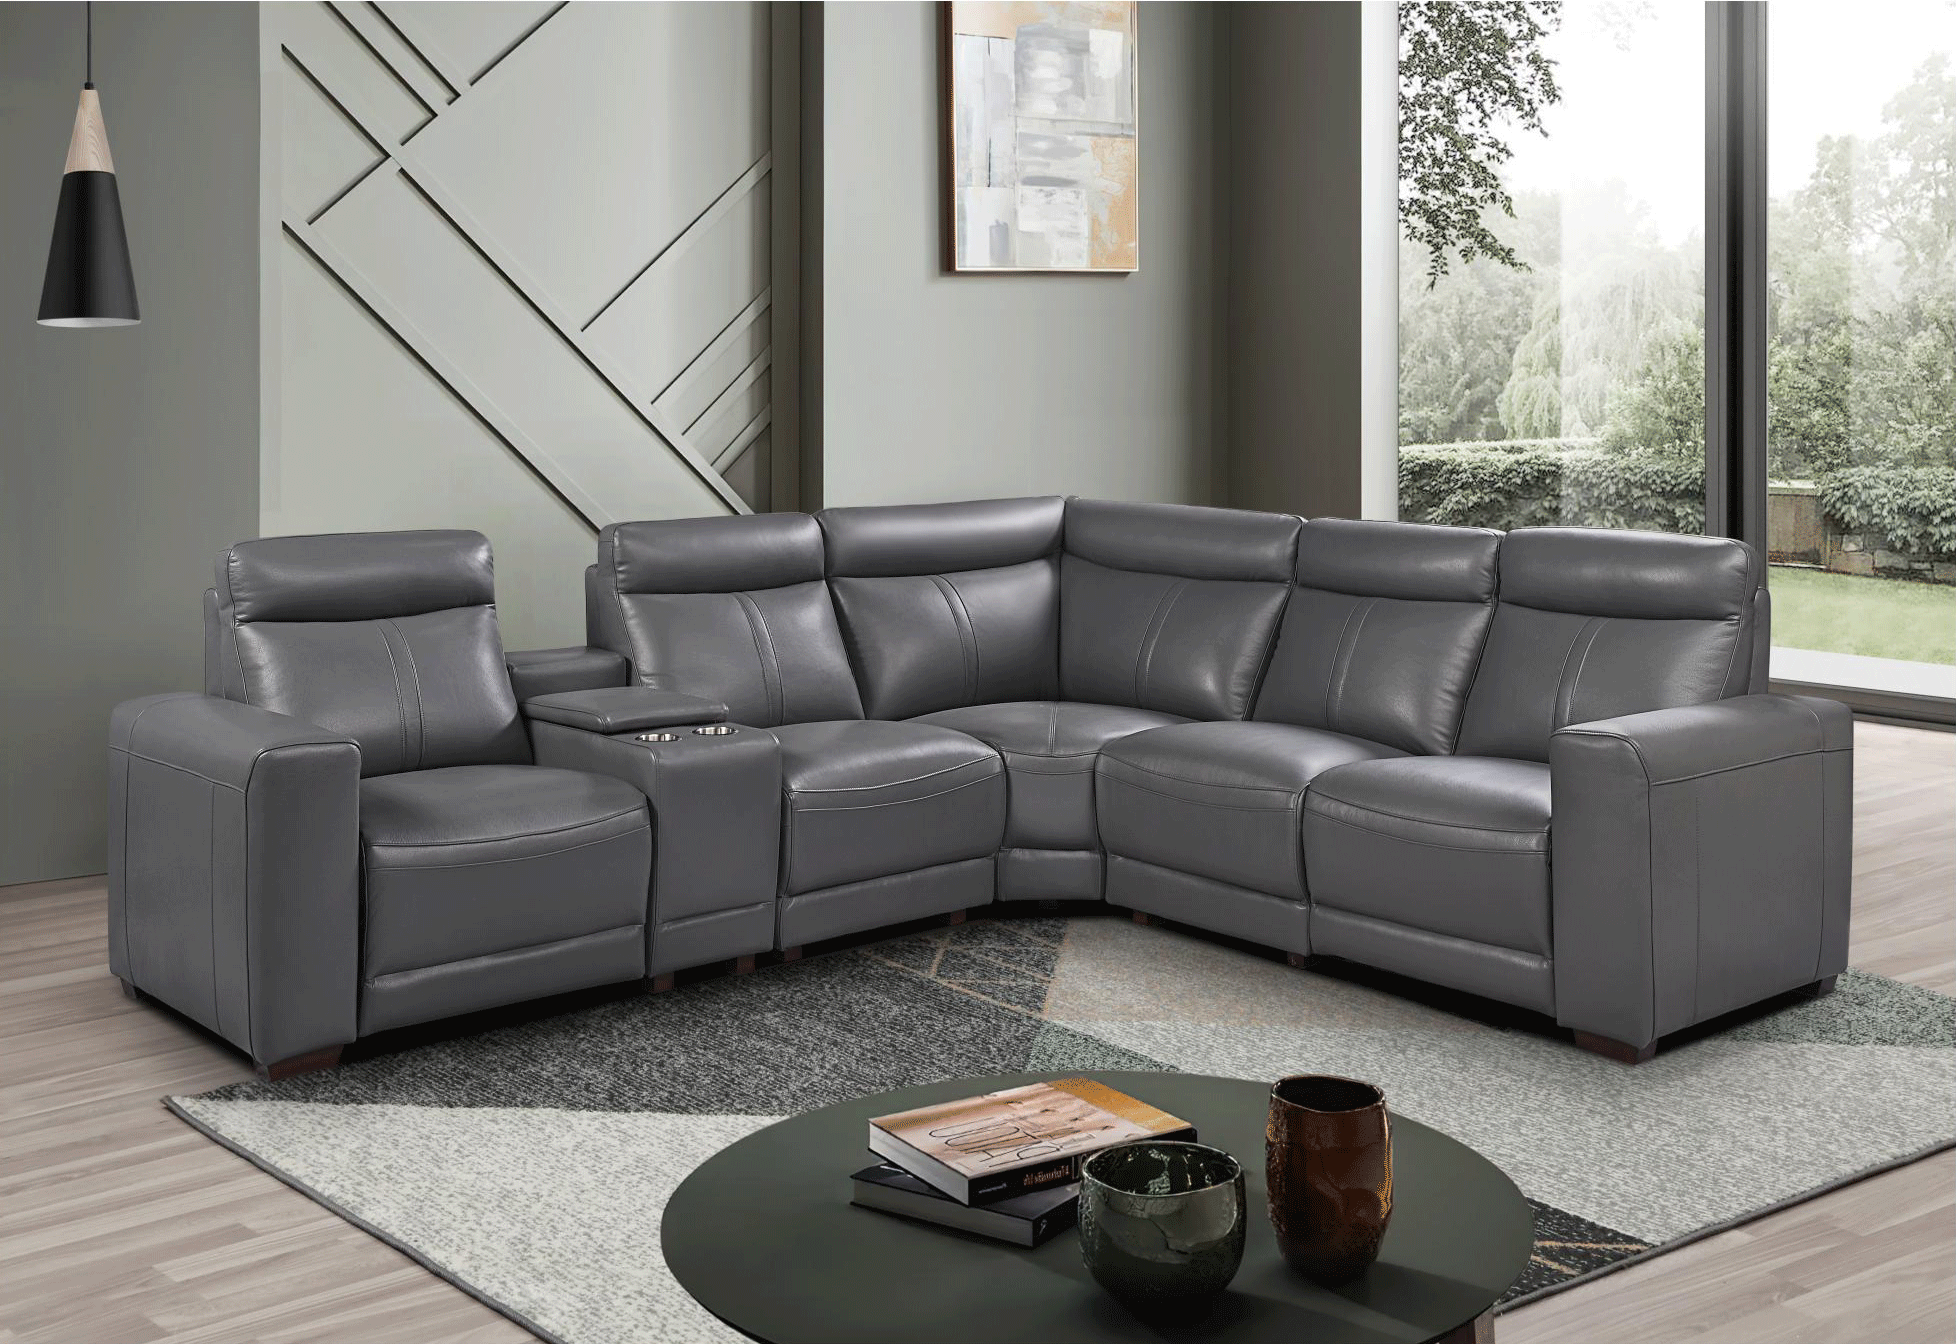 Brands FSH Massage Chairs 2777 Sectional w/ recliners